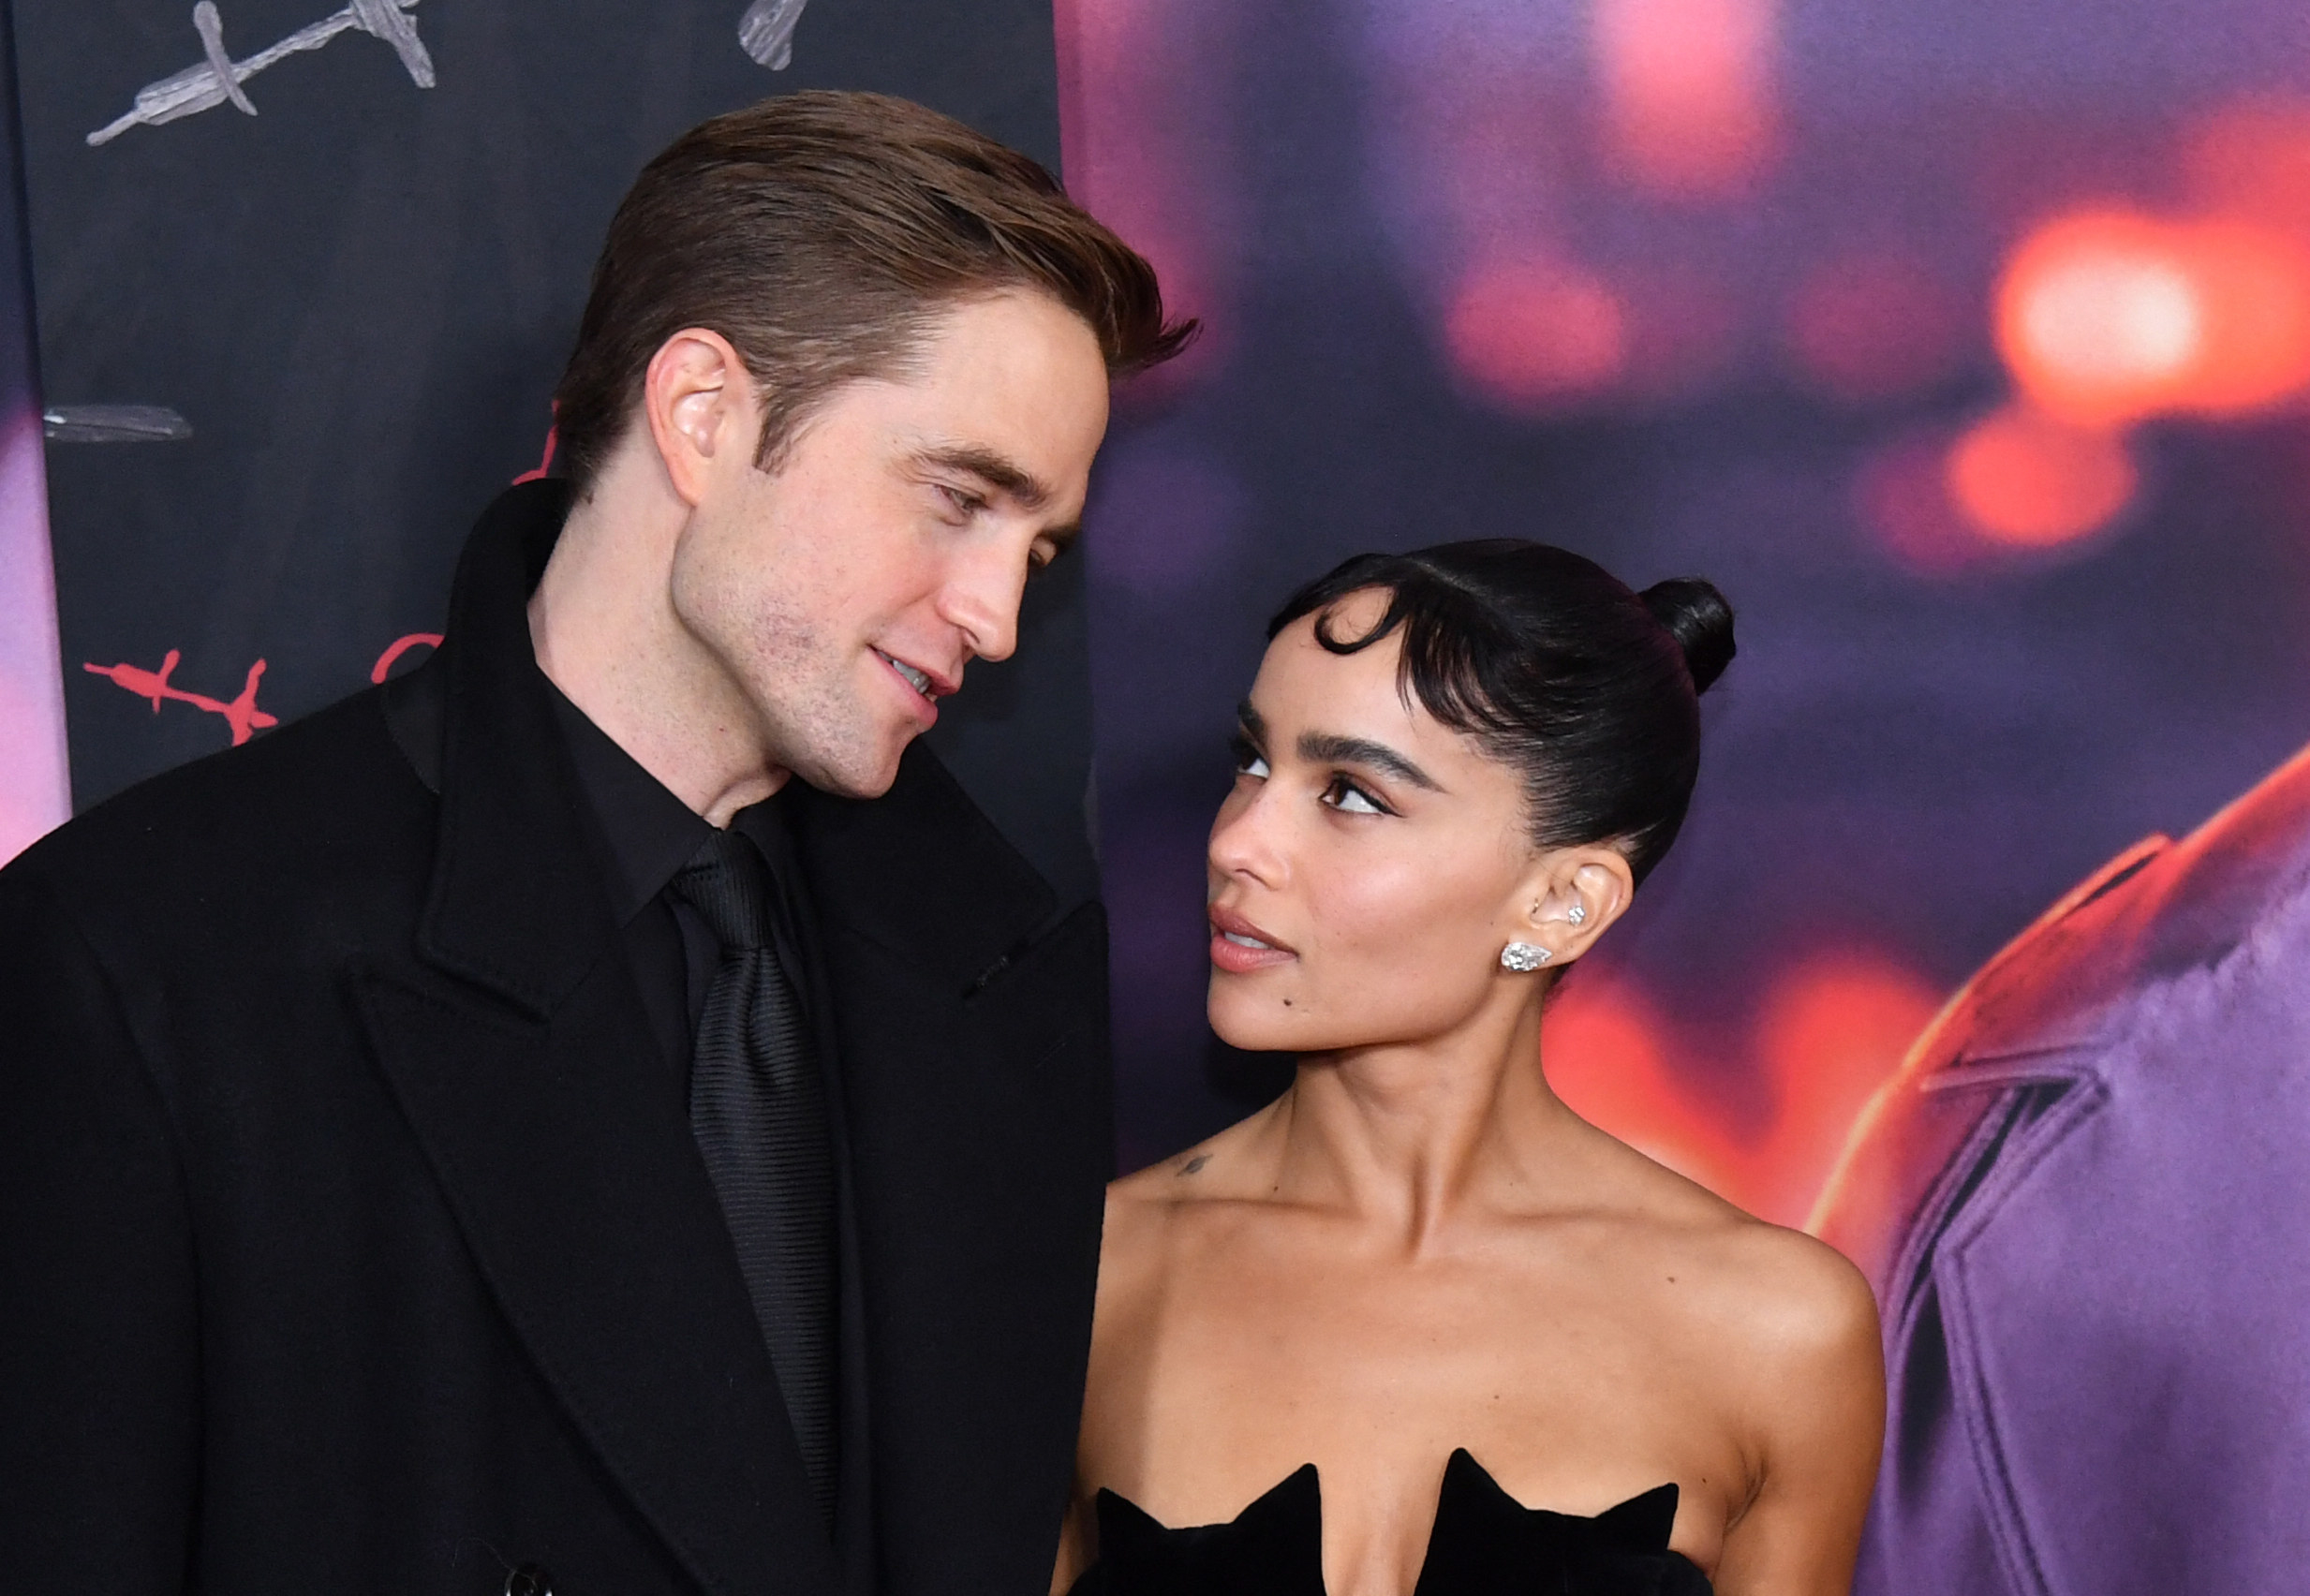 Zoe Kravitz and Robert Pattinson looking at each other during th Batman premiere